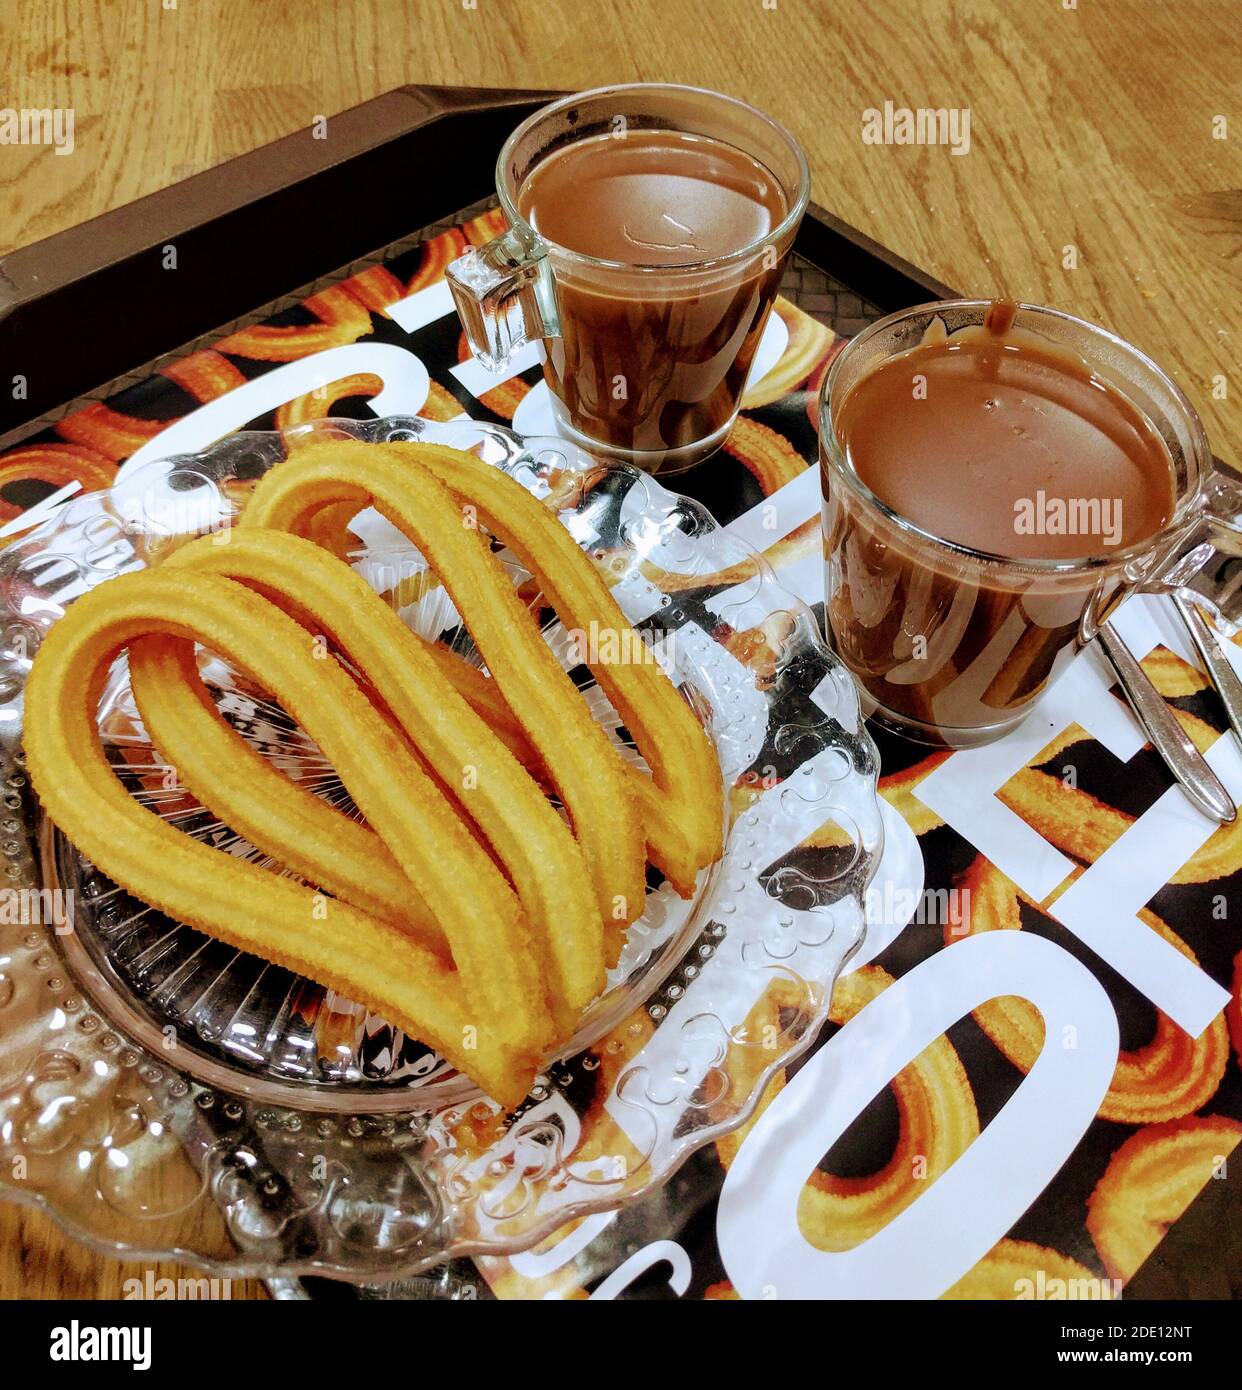 Traditional spanish churros with hot chocolate on a wooden table. Traditional spanish sweet baked goods. Stock Photo